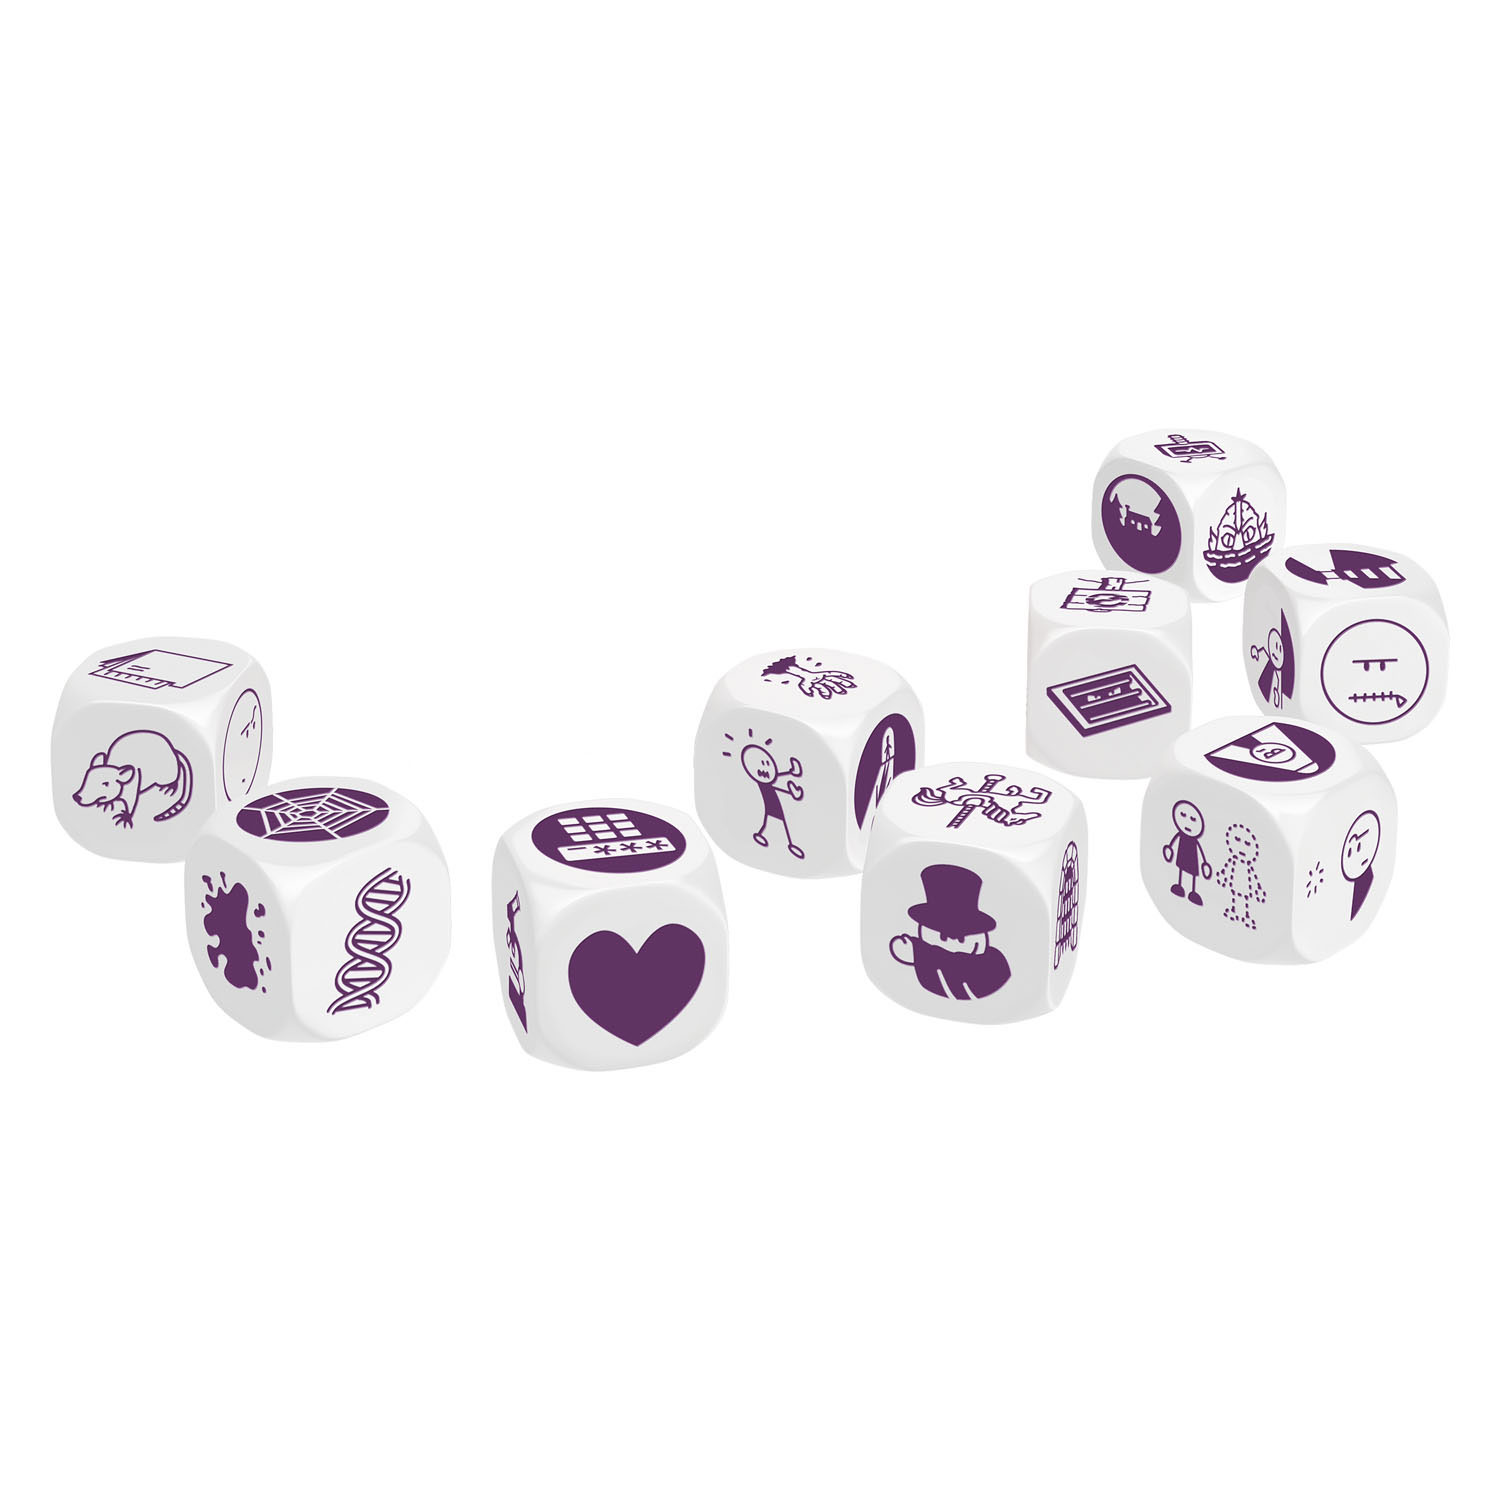 Rorys Story Cubes Mystery